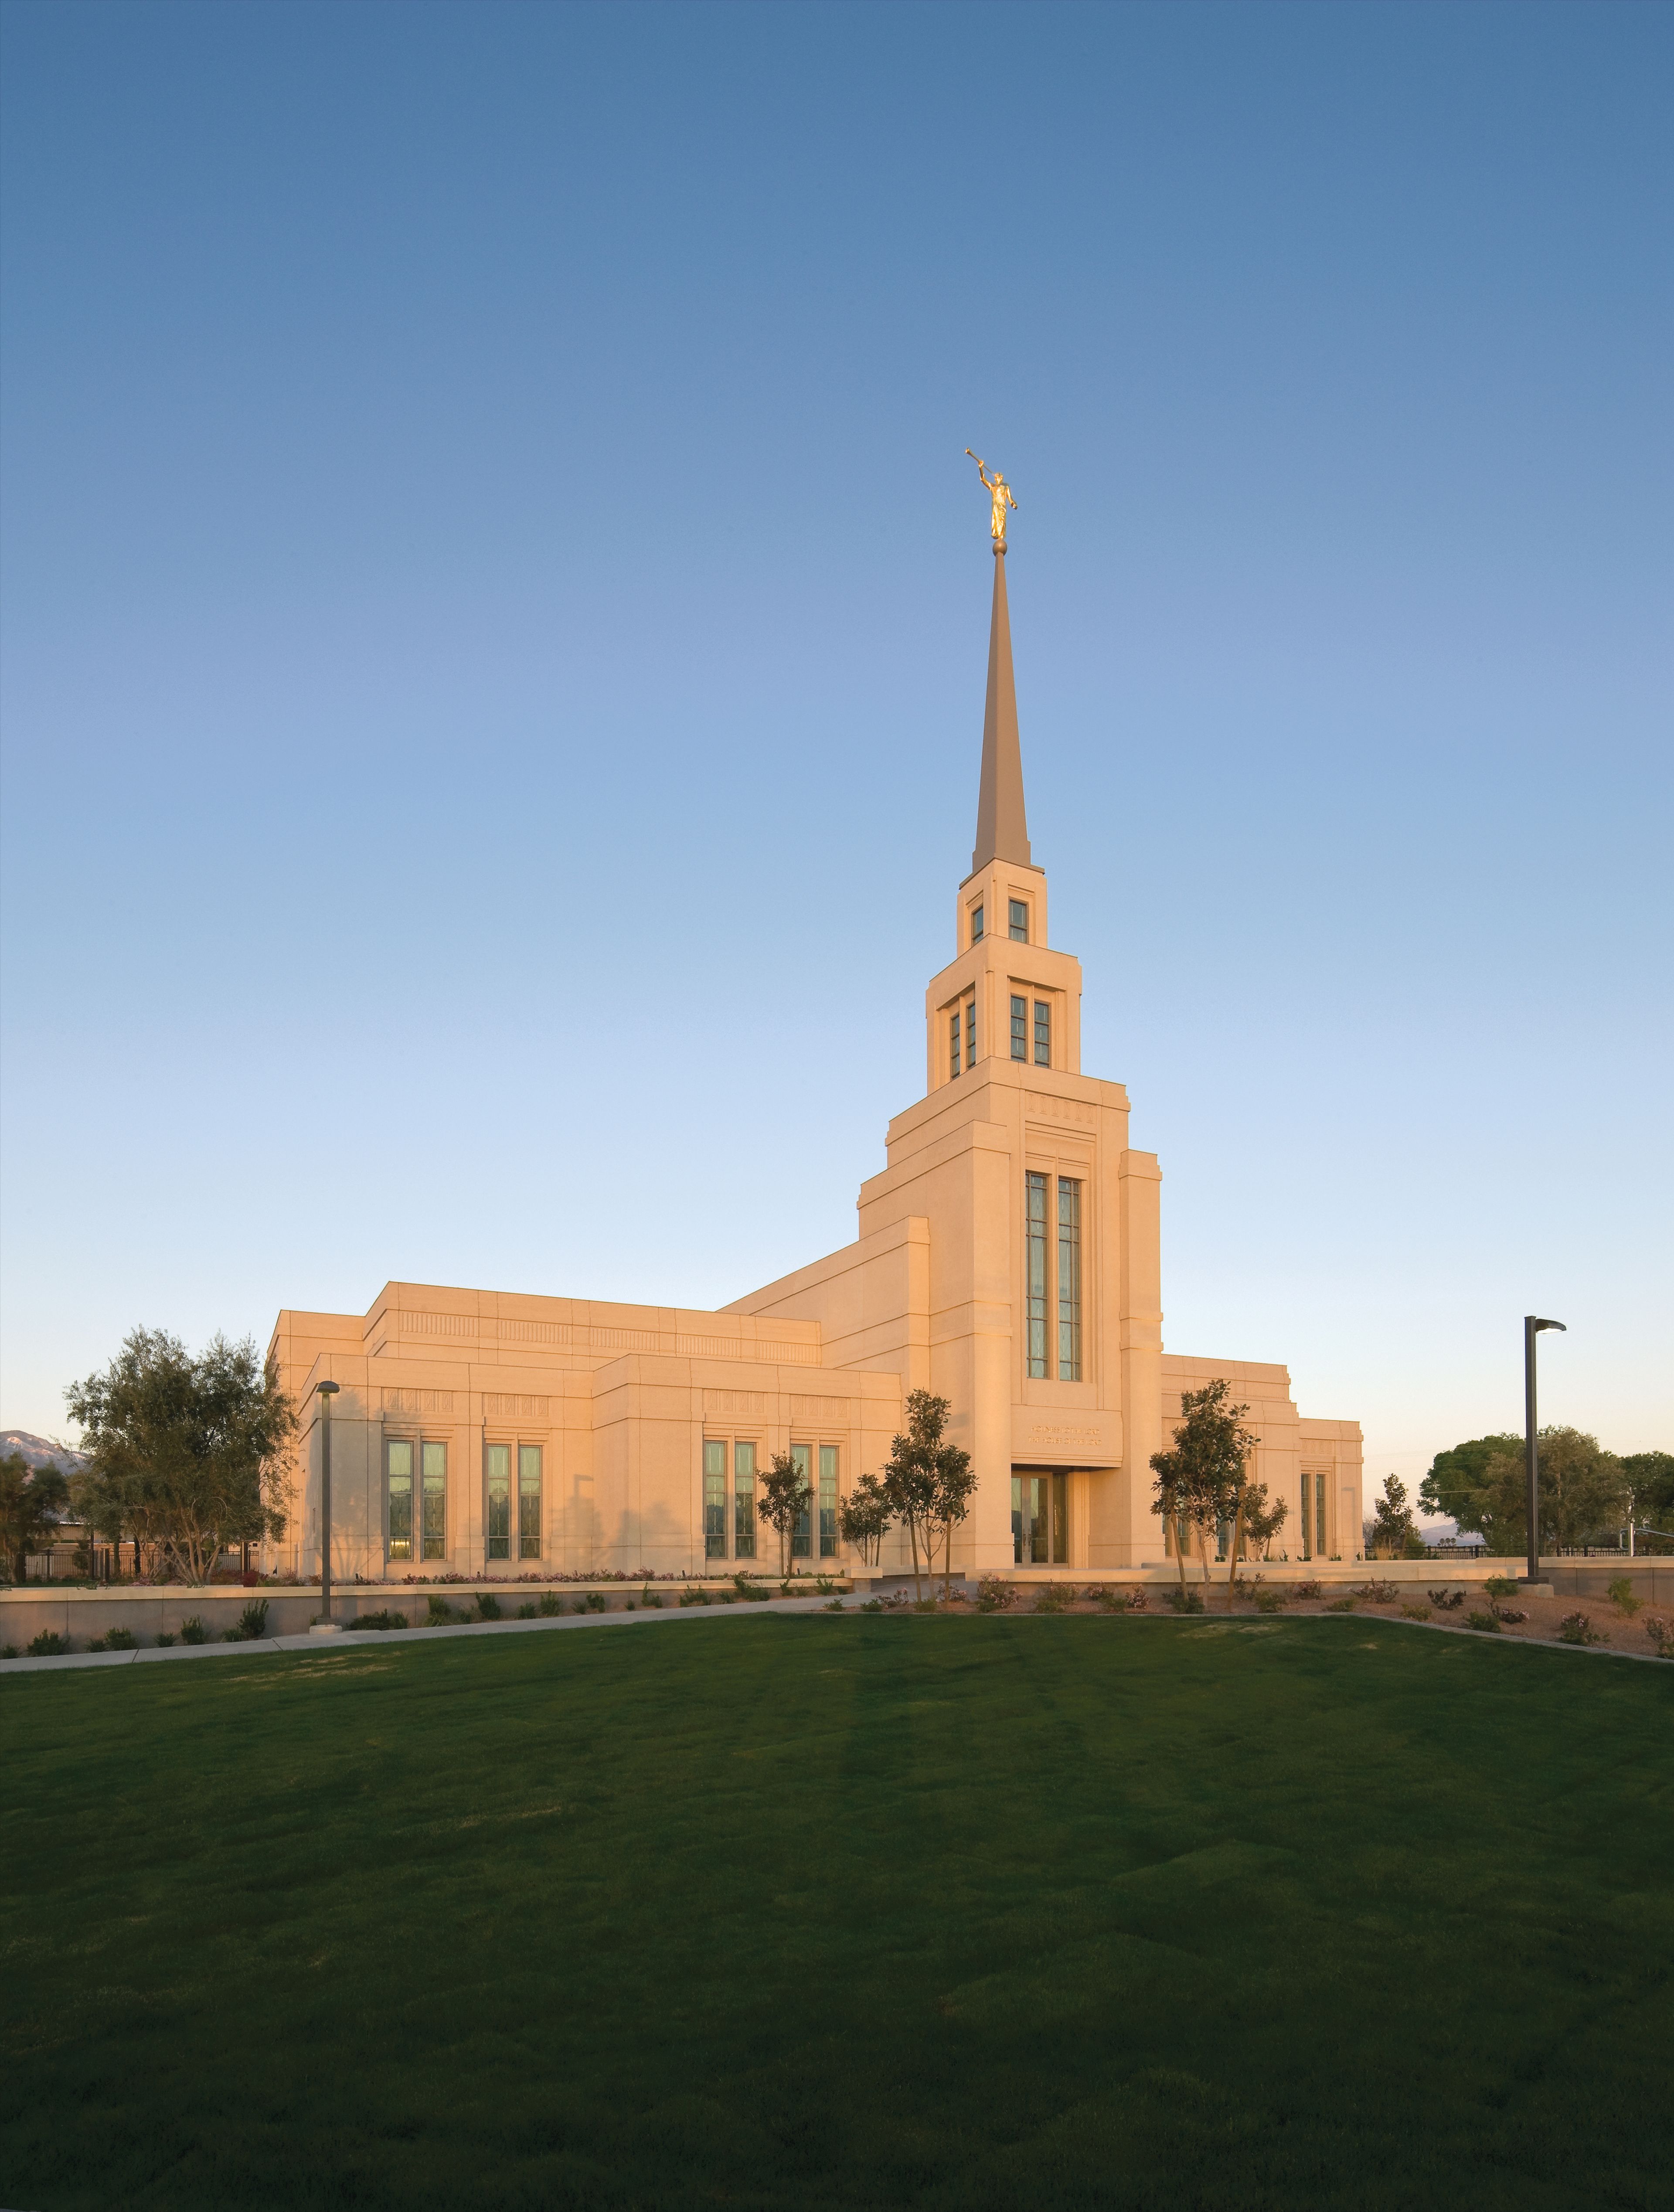 The Gila Valley Arizona Temple at sunset, including the grounds.